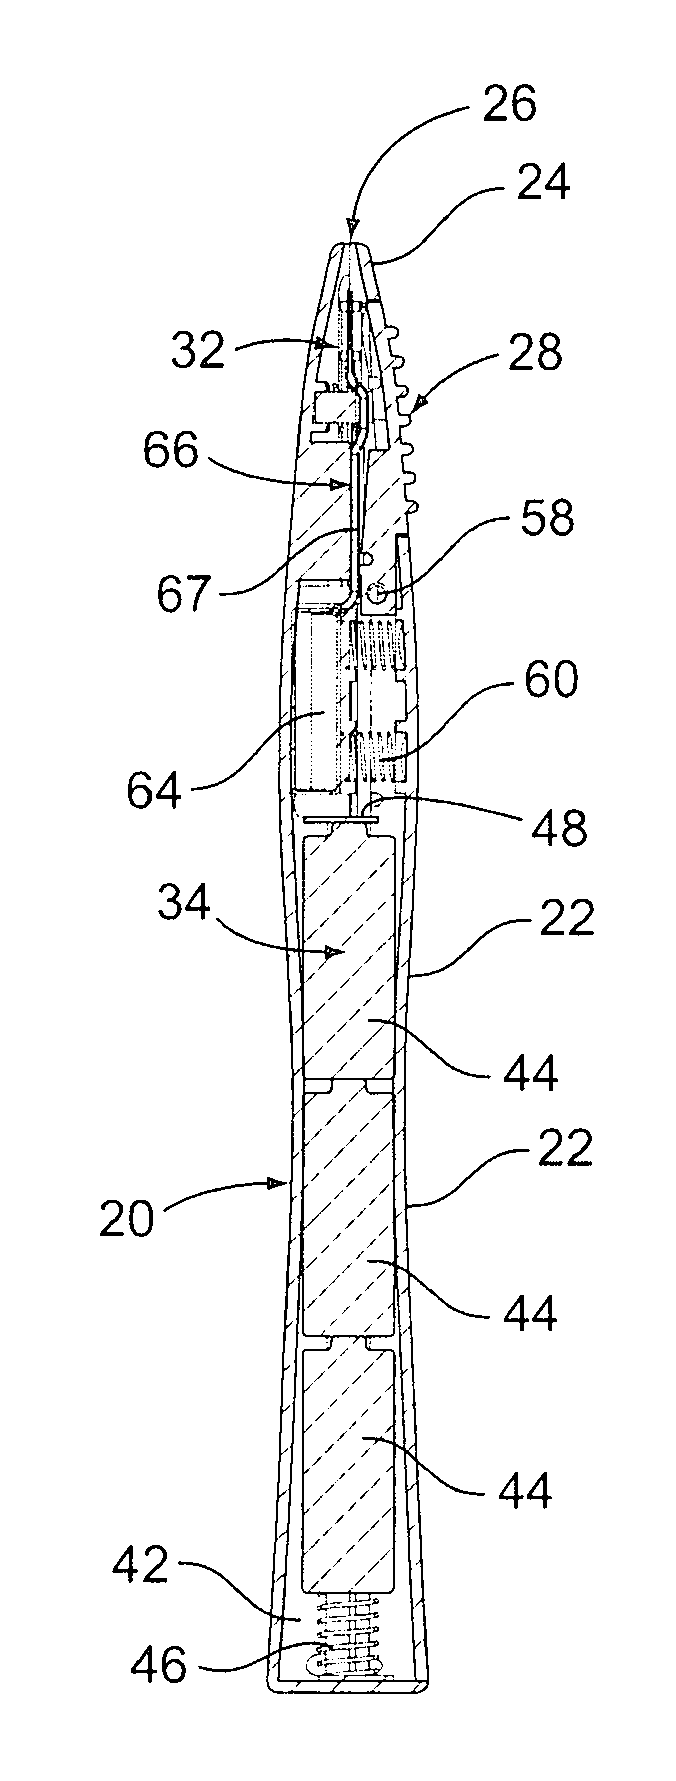 Vapor delivery devices and methods